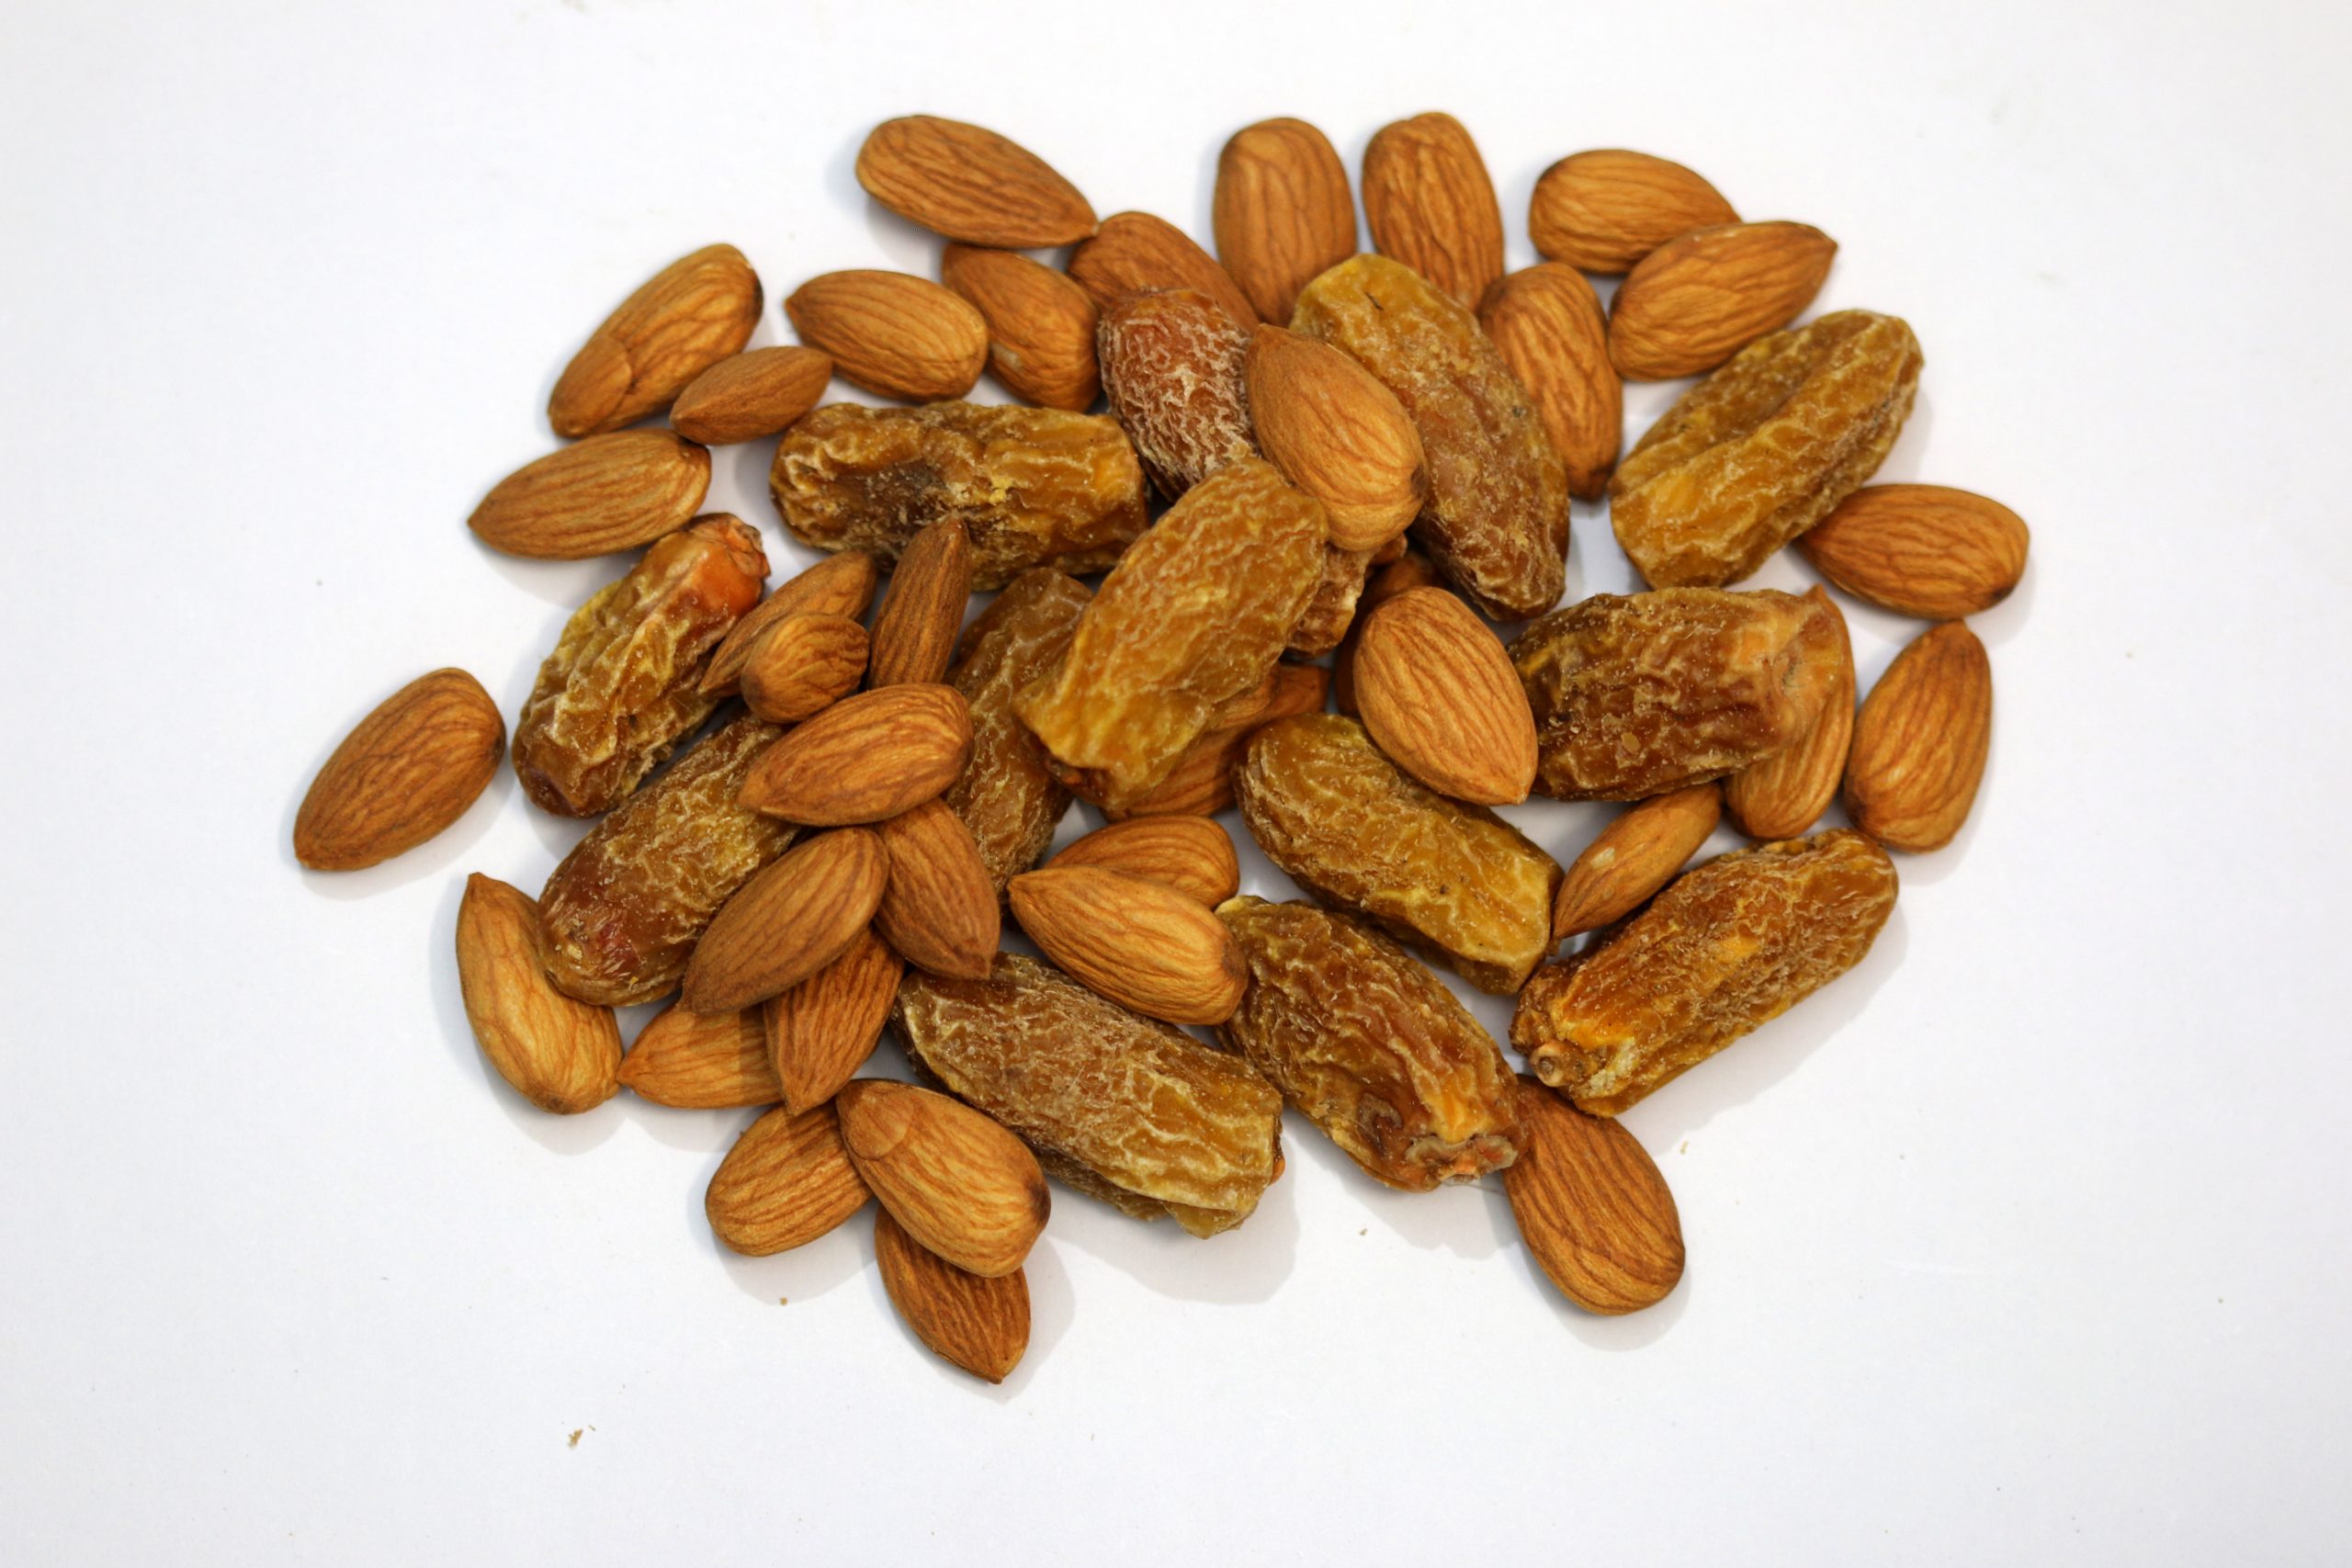 Almonds and dates